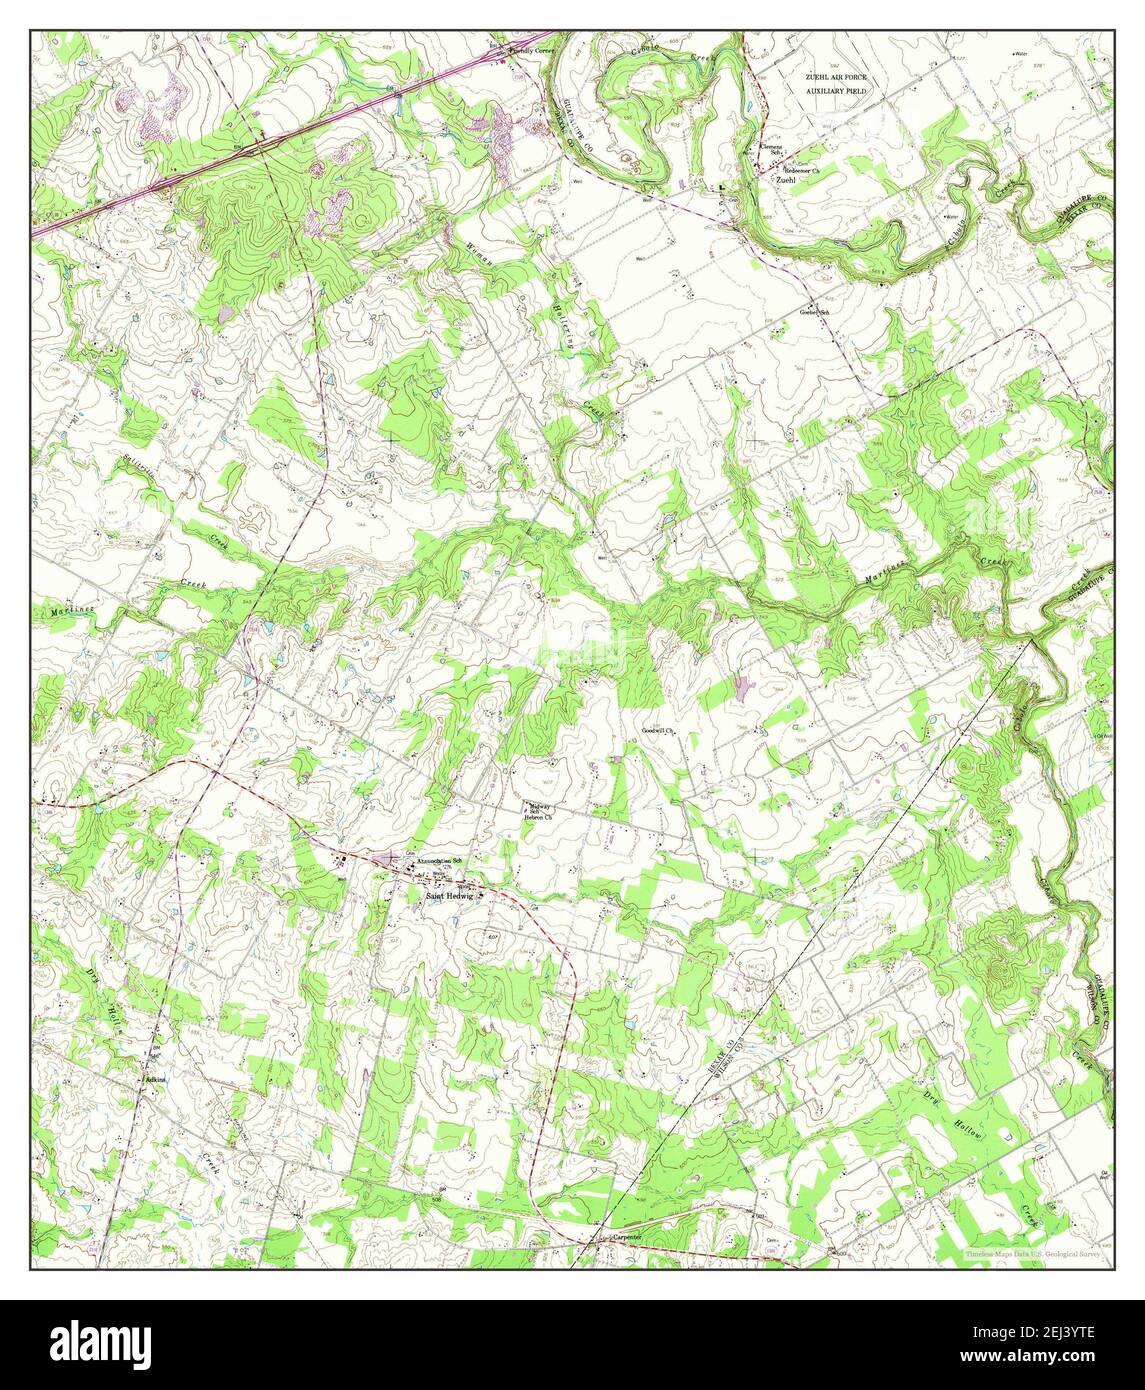 Saint Hedwig, Texas, map 1958, 1:24000, United States of America by Timeless Maps, data U.S. Geological Survey Stock Photo